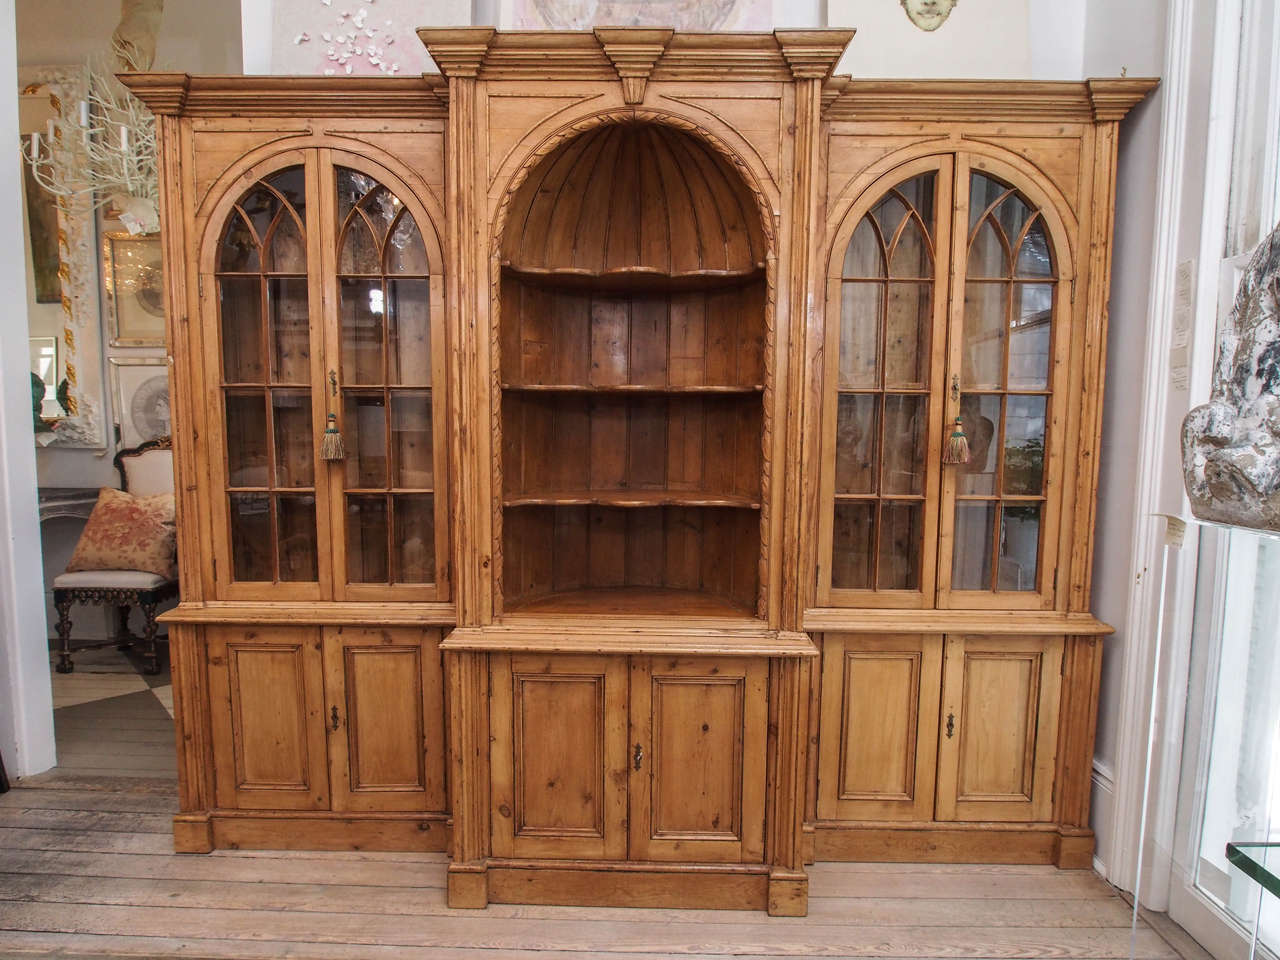 Exquisite solid English Pine Breakfront Bookcase is a perfect piece to fill a tall and wide space with limited depth. Hand carved crown and base mouldings, and beautifully detailed arched center and flanking side cases. The center case is 35"